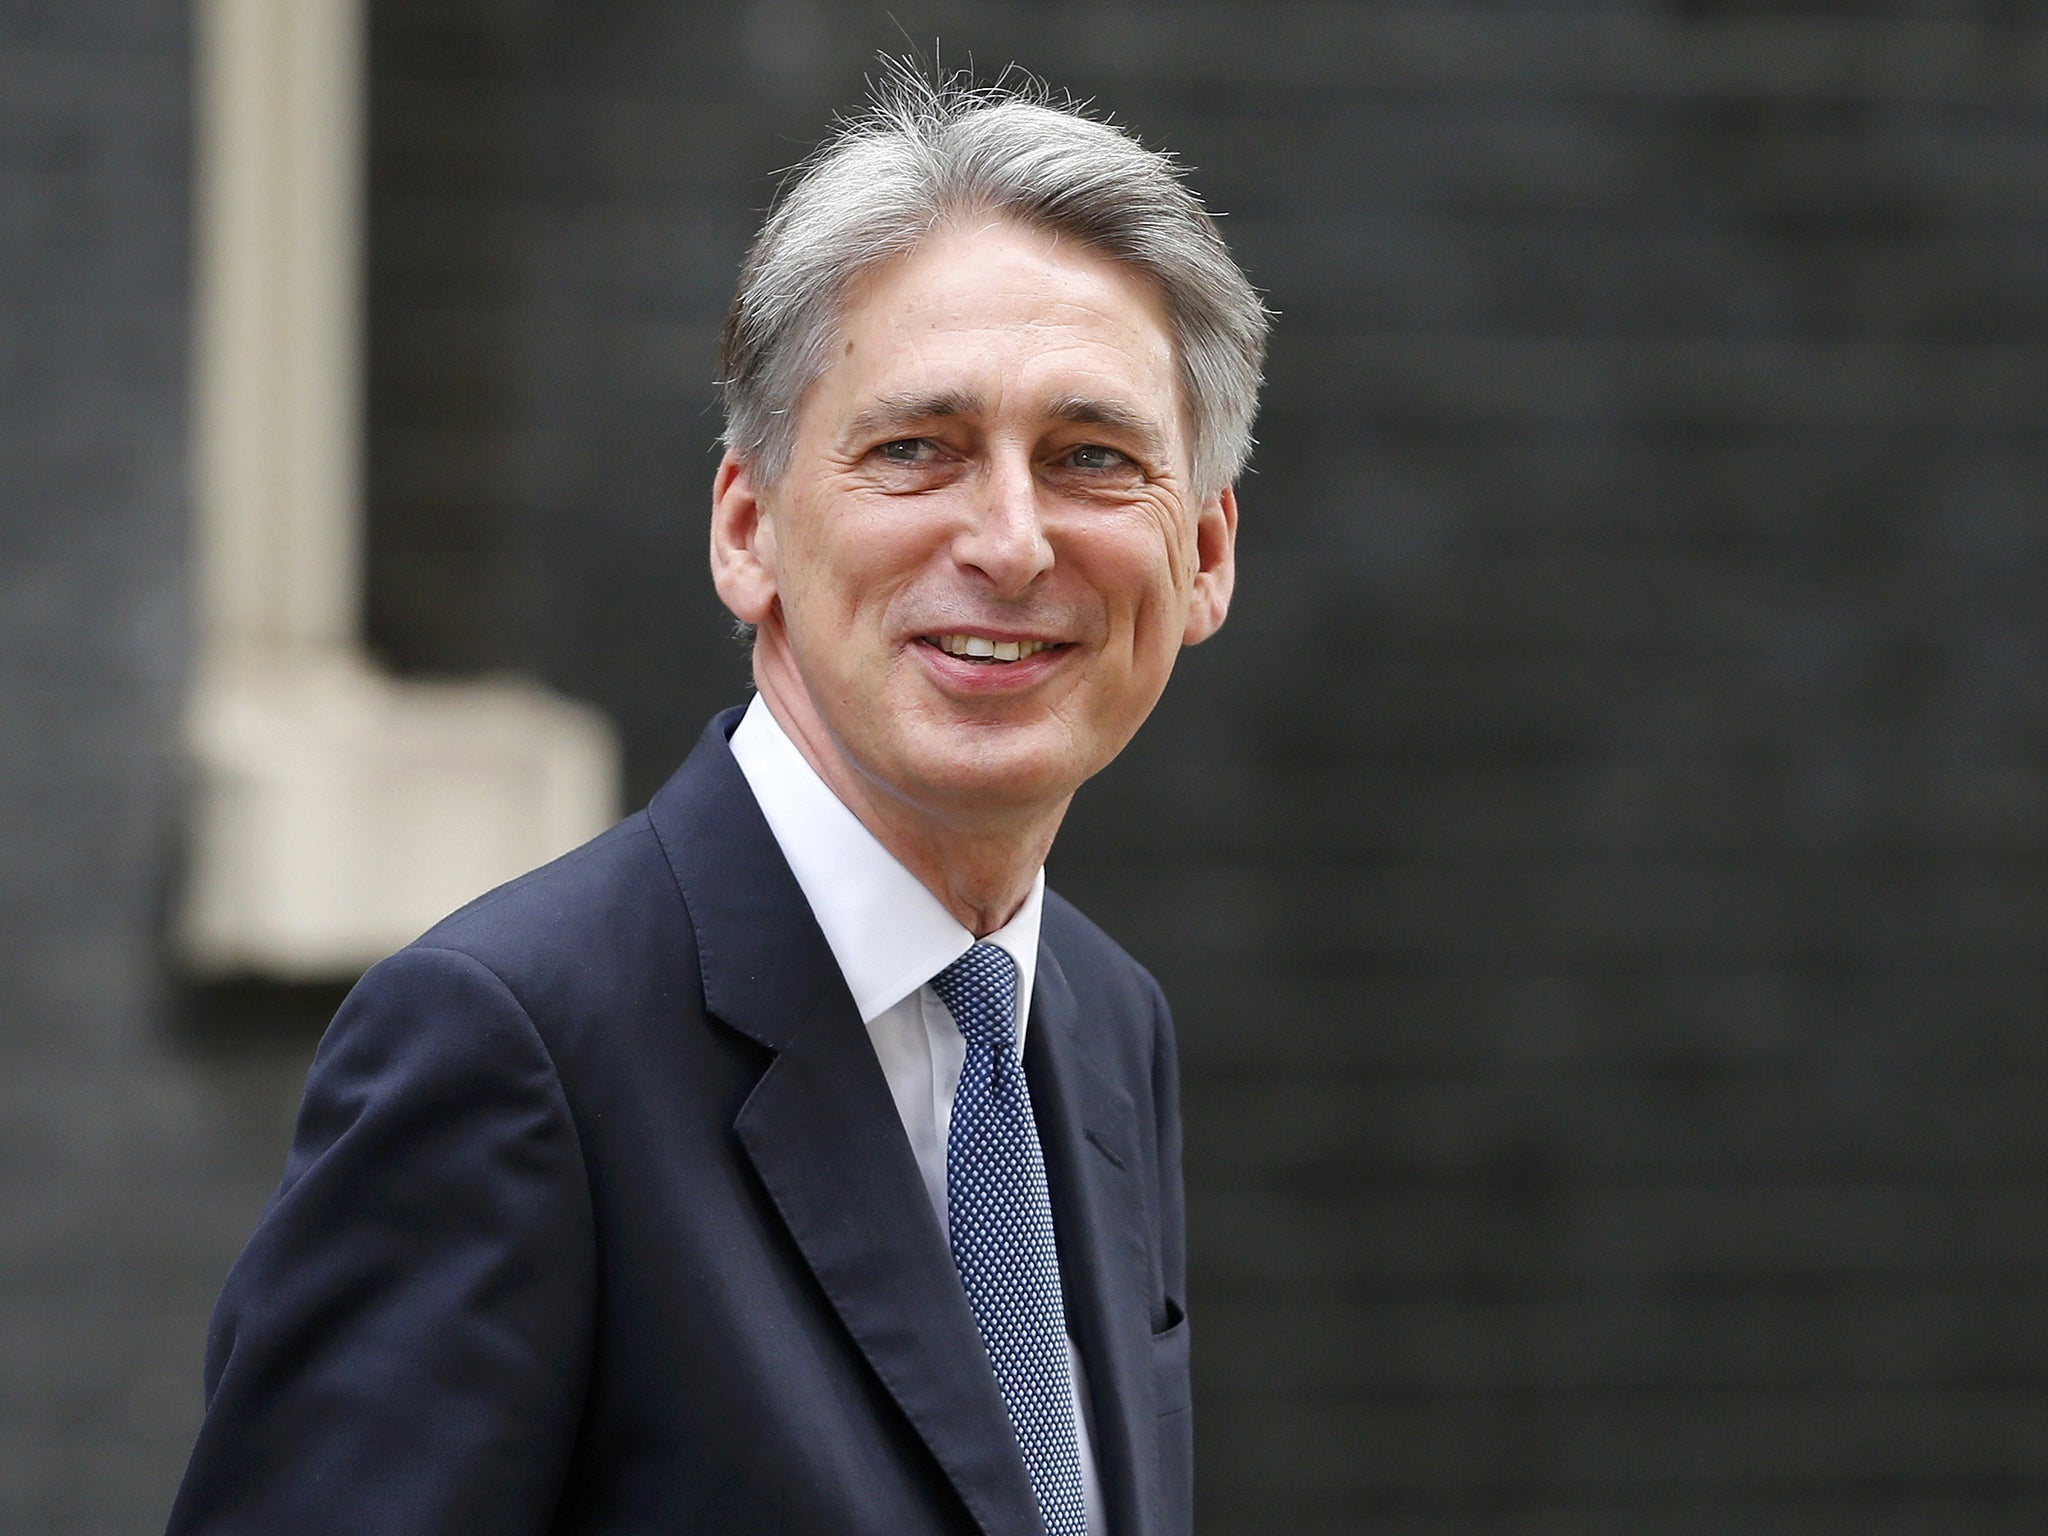 Philip Hammond, Foreign Secretary, has said he would vote to leave the EU unless powers are returned to UK